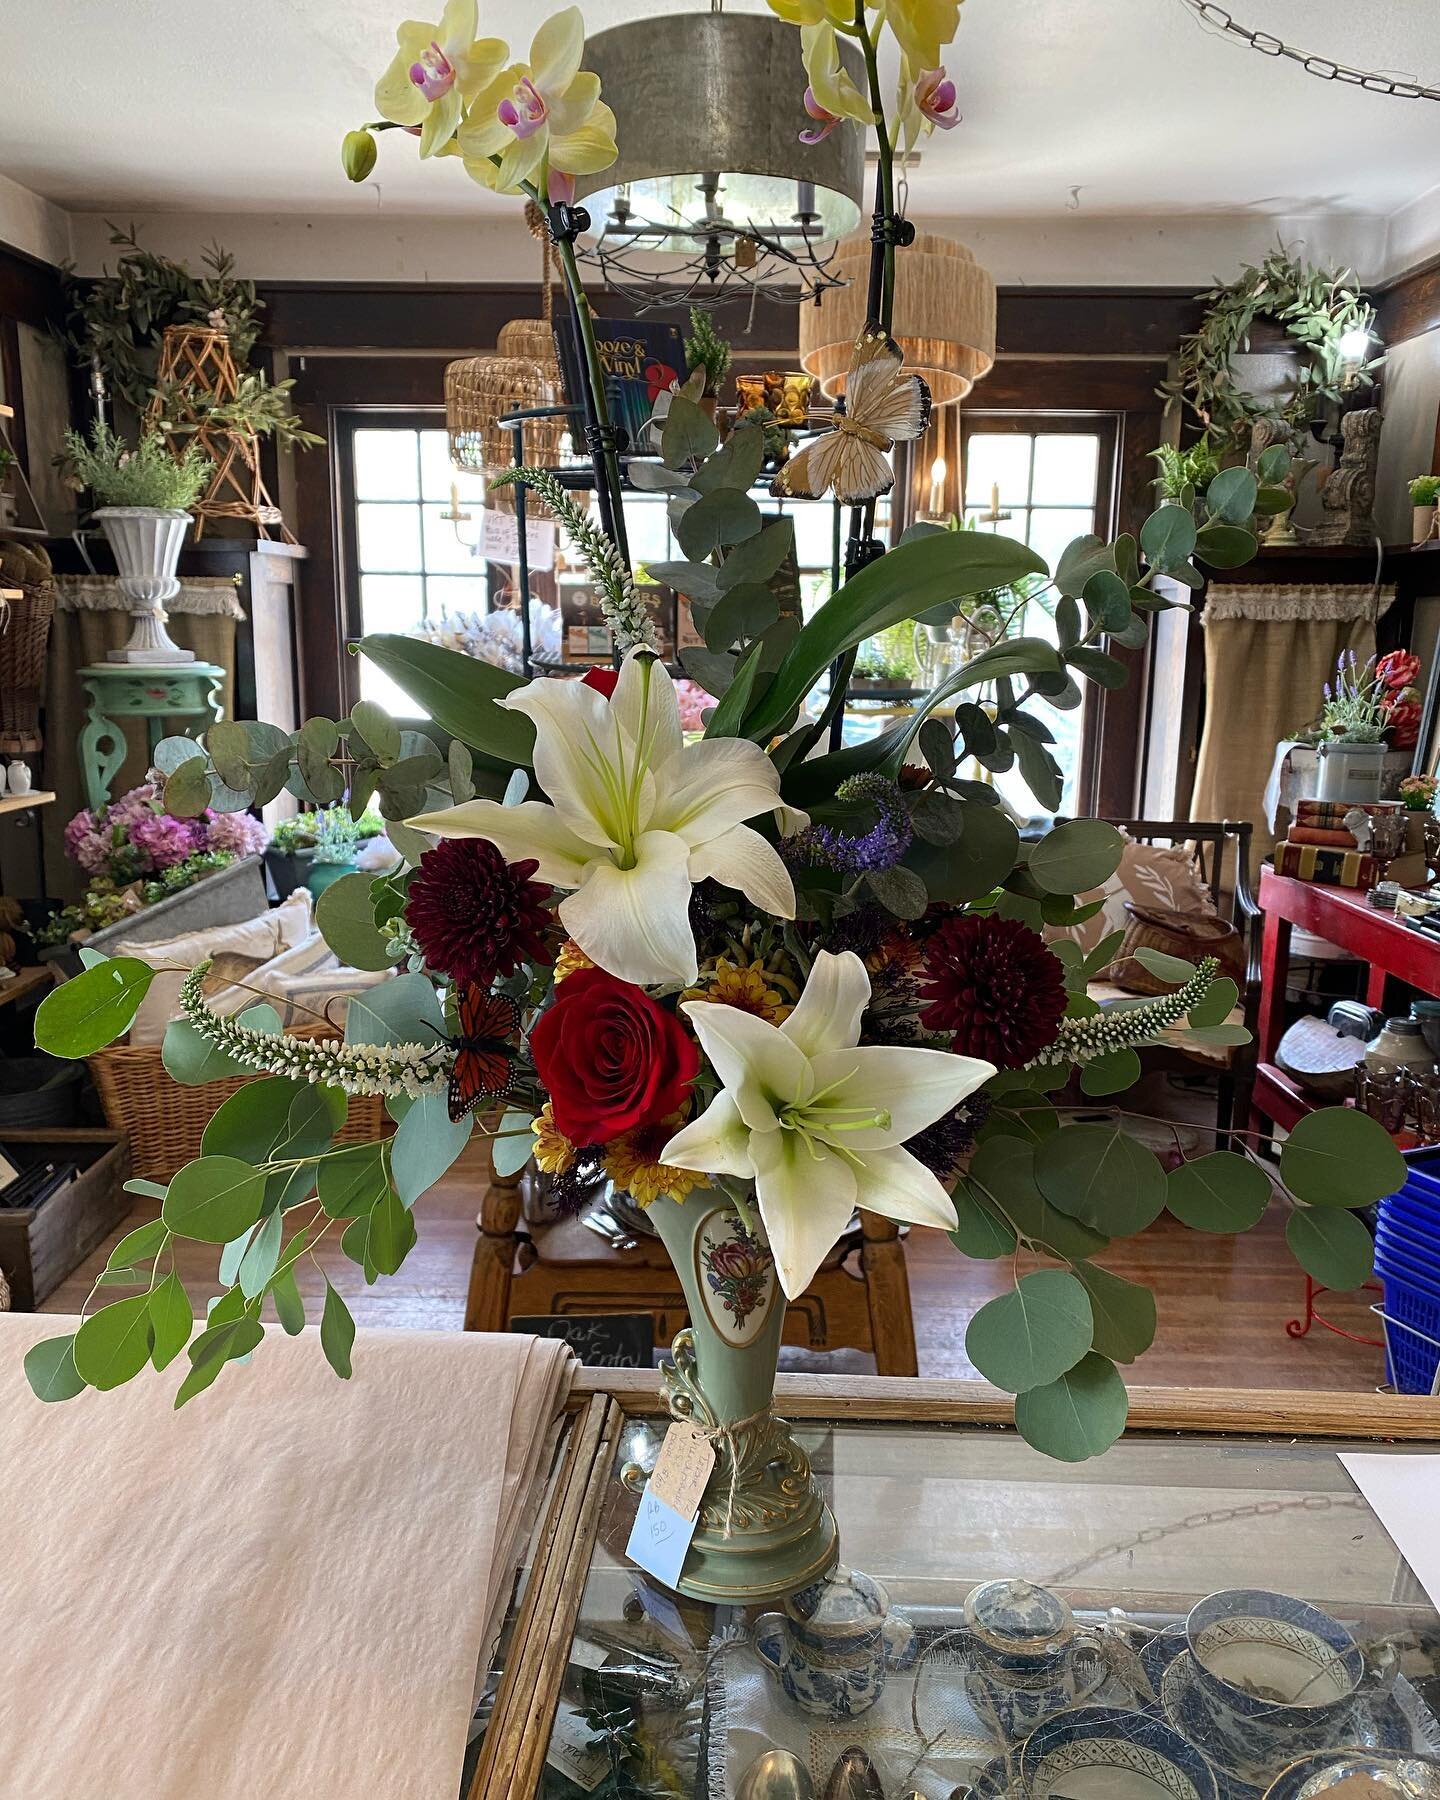 Oh my goodness! Luke @rootboundboise has outdone himself! Come get your custom floral arrangement today. #mothersday #bestgift #customfloral #boise #boiseidaho